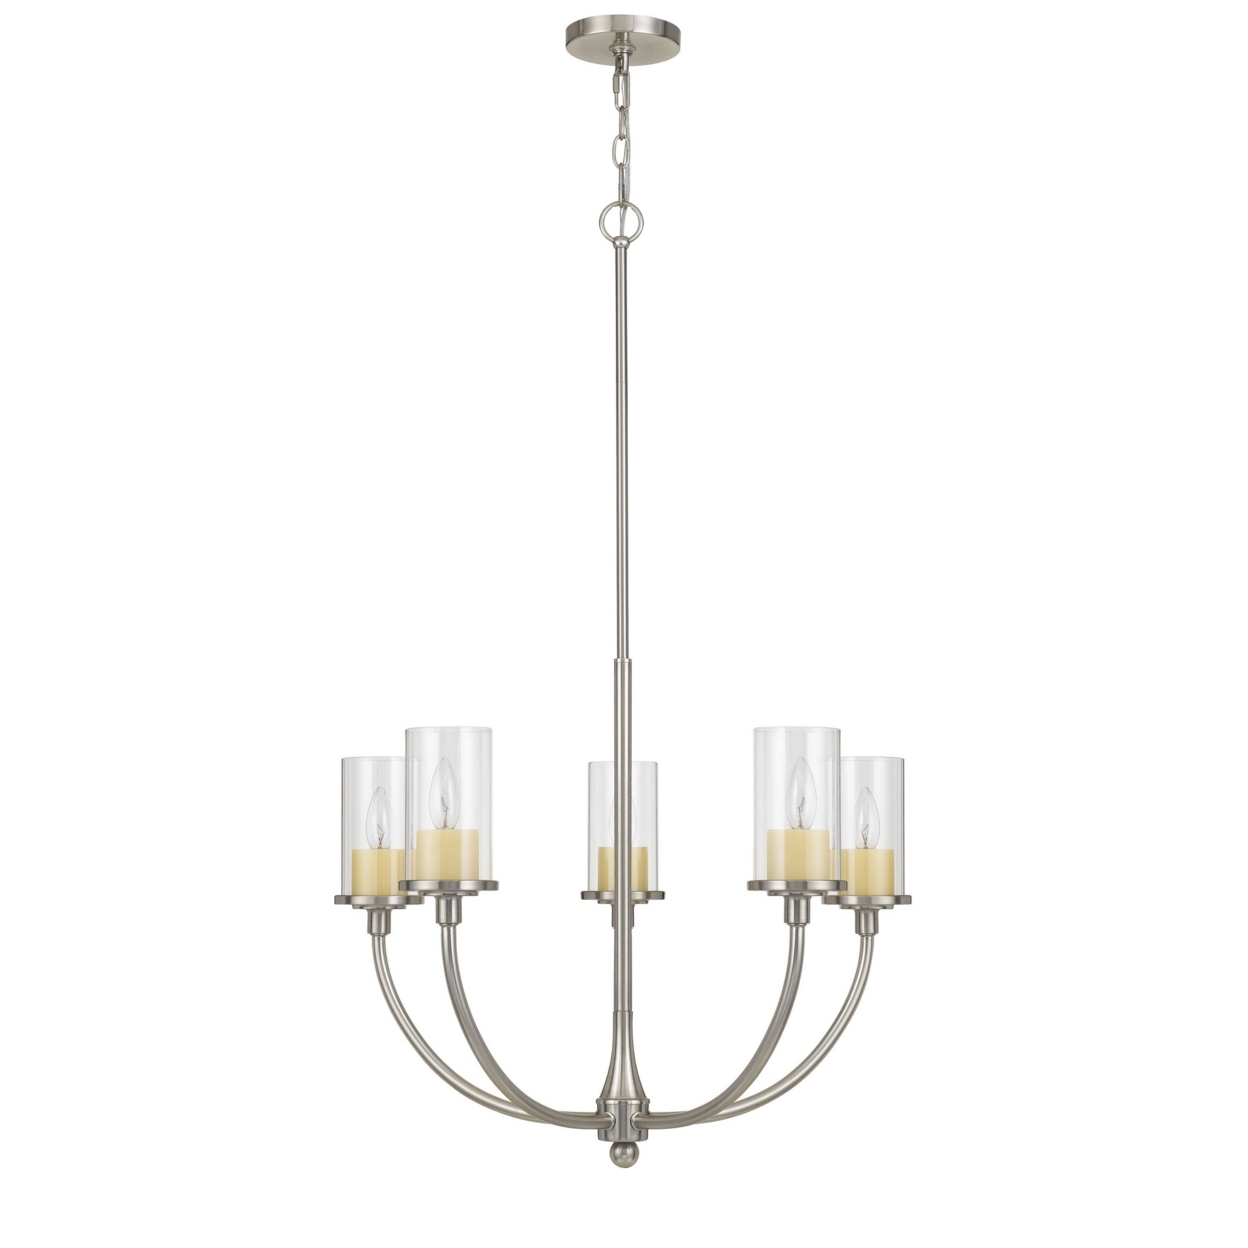 Metal Chandelier With 5 Cylindrical Glass Shades, Silver- Saltoro Sherpi